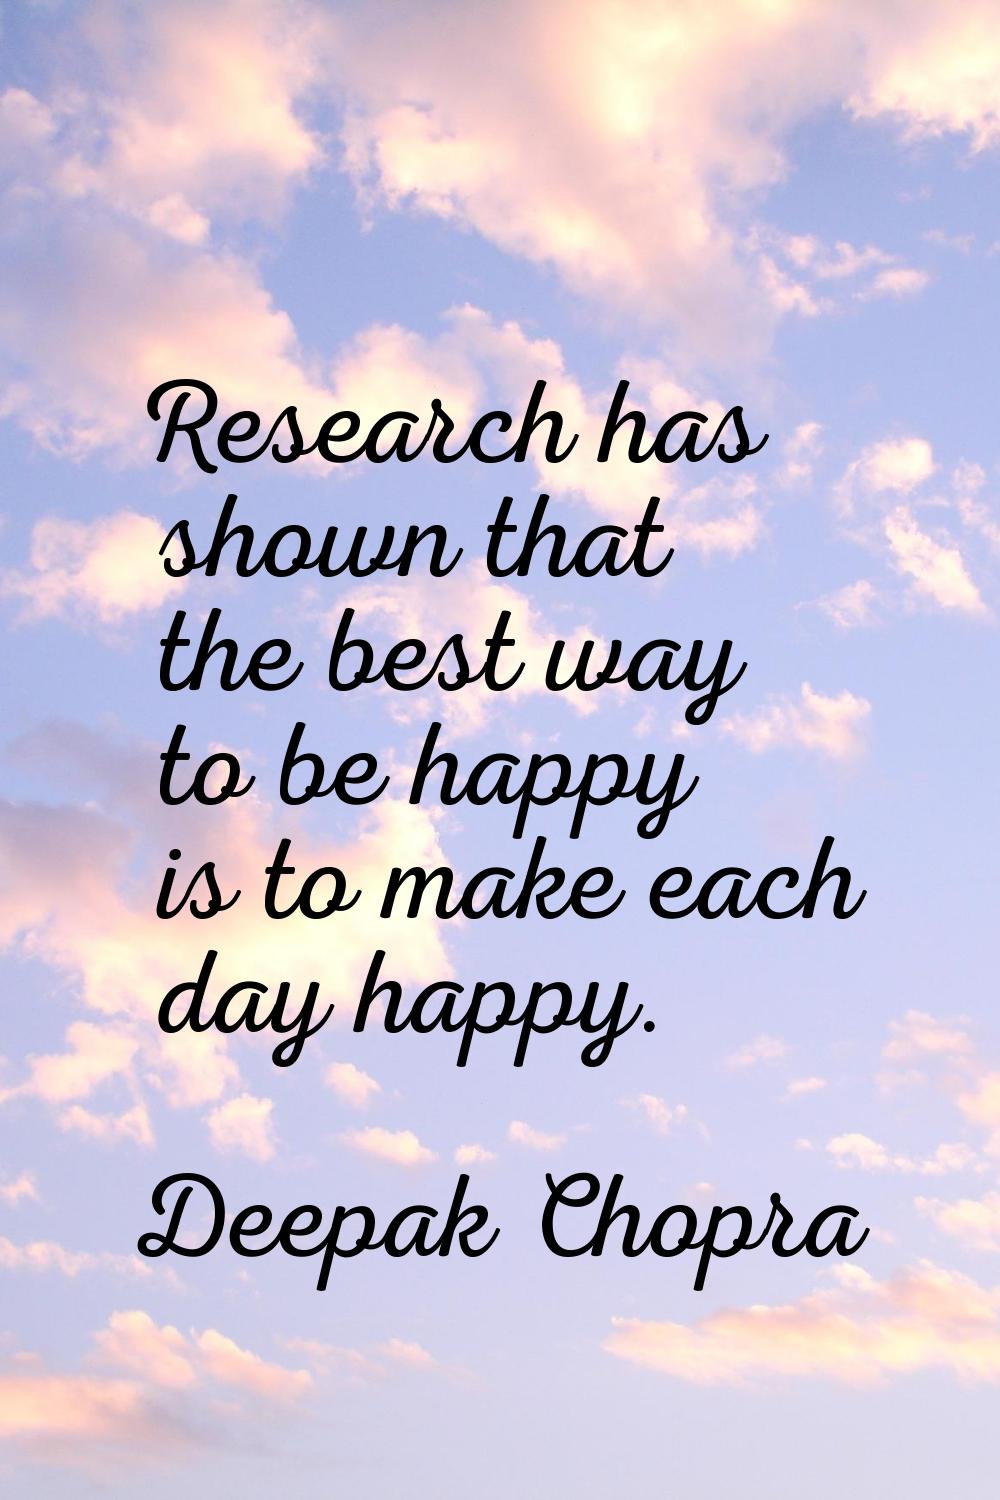 Research has shown that the best way to be happy is to make each day happy.